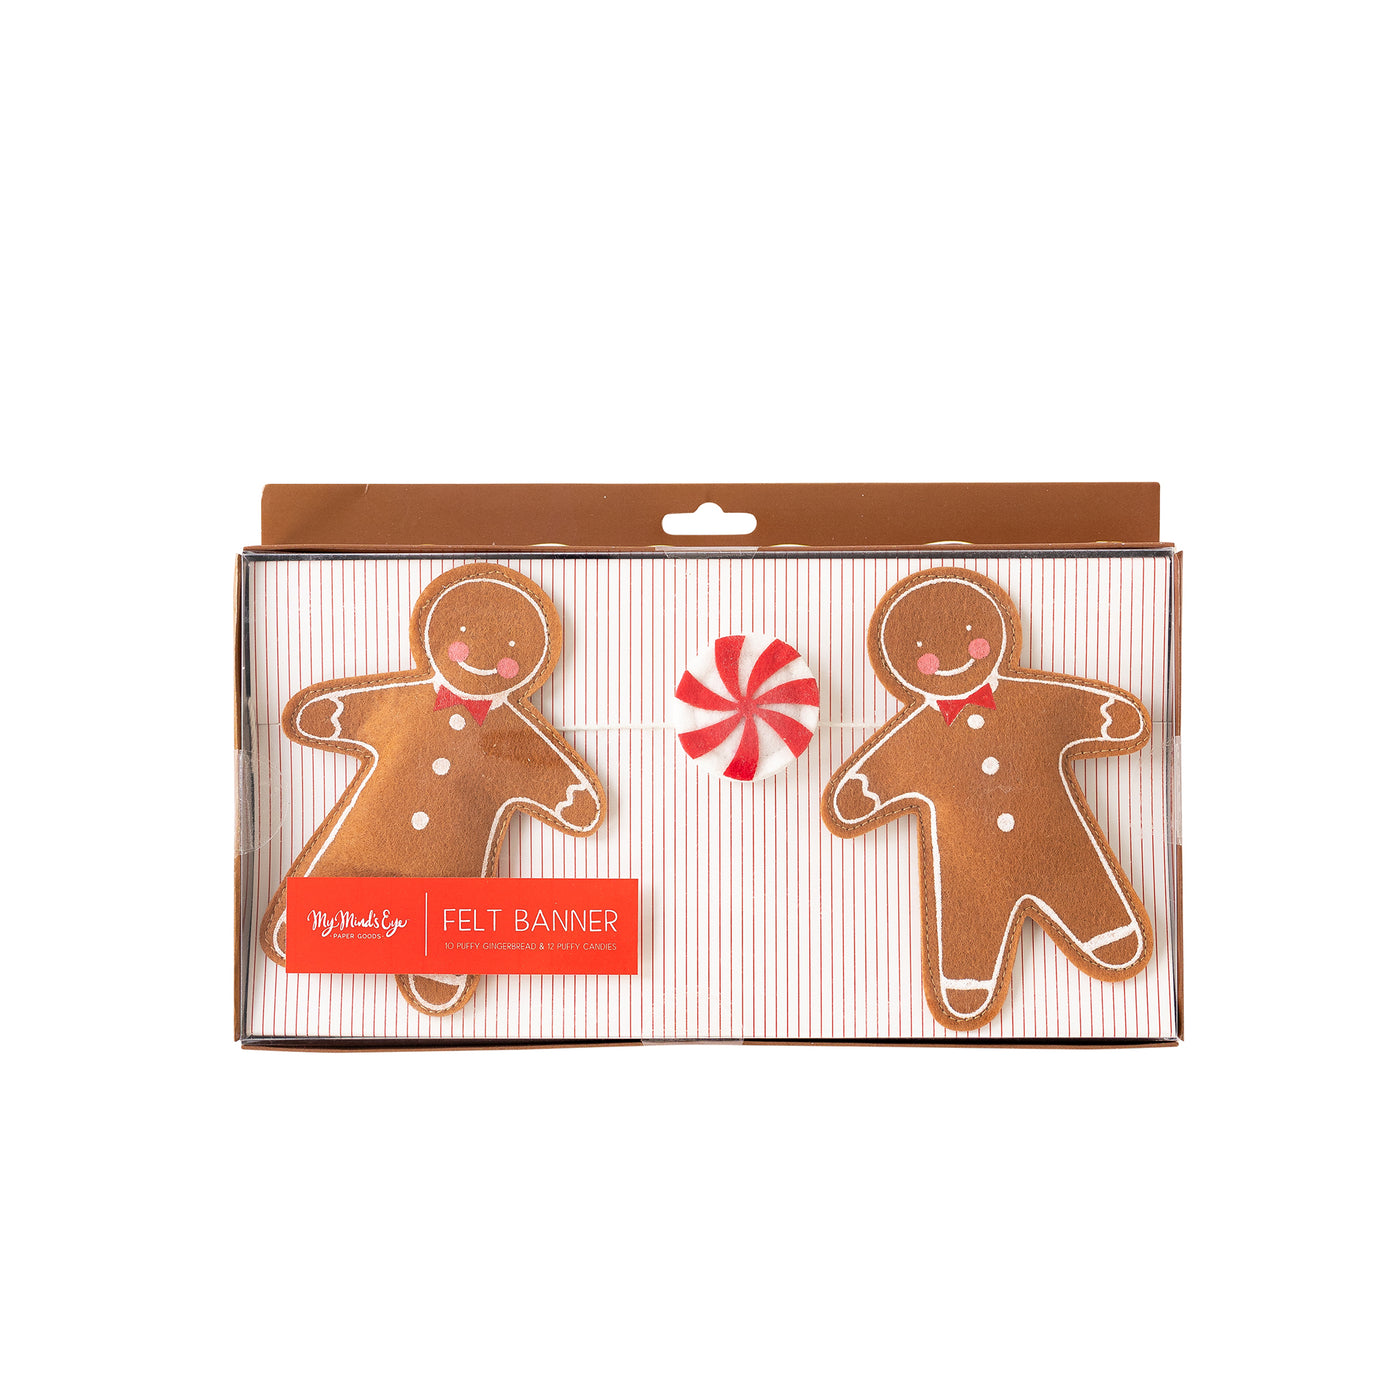 PLHB89 - Puffy Felt Gingerbread and Candy Banner